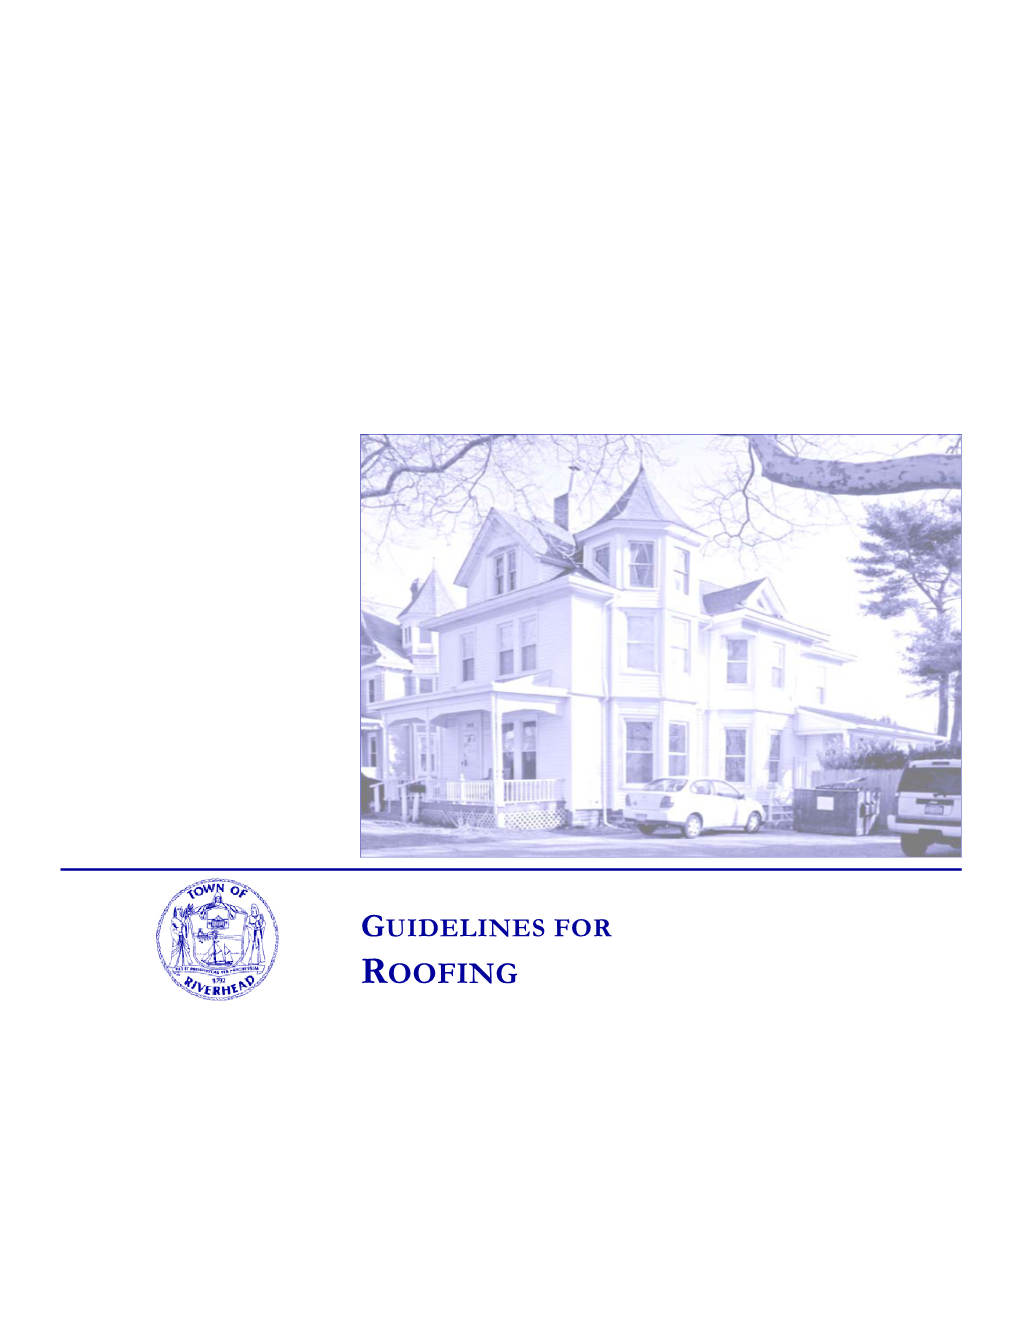 ROOFING Town of Riverhead Landmarks Preservation Commission GUIDELINES for ROOFING